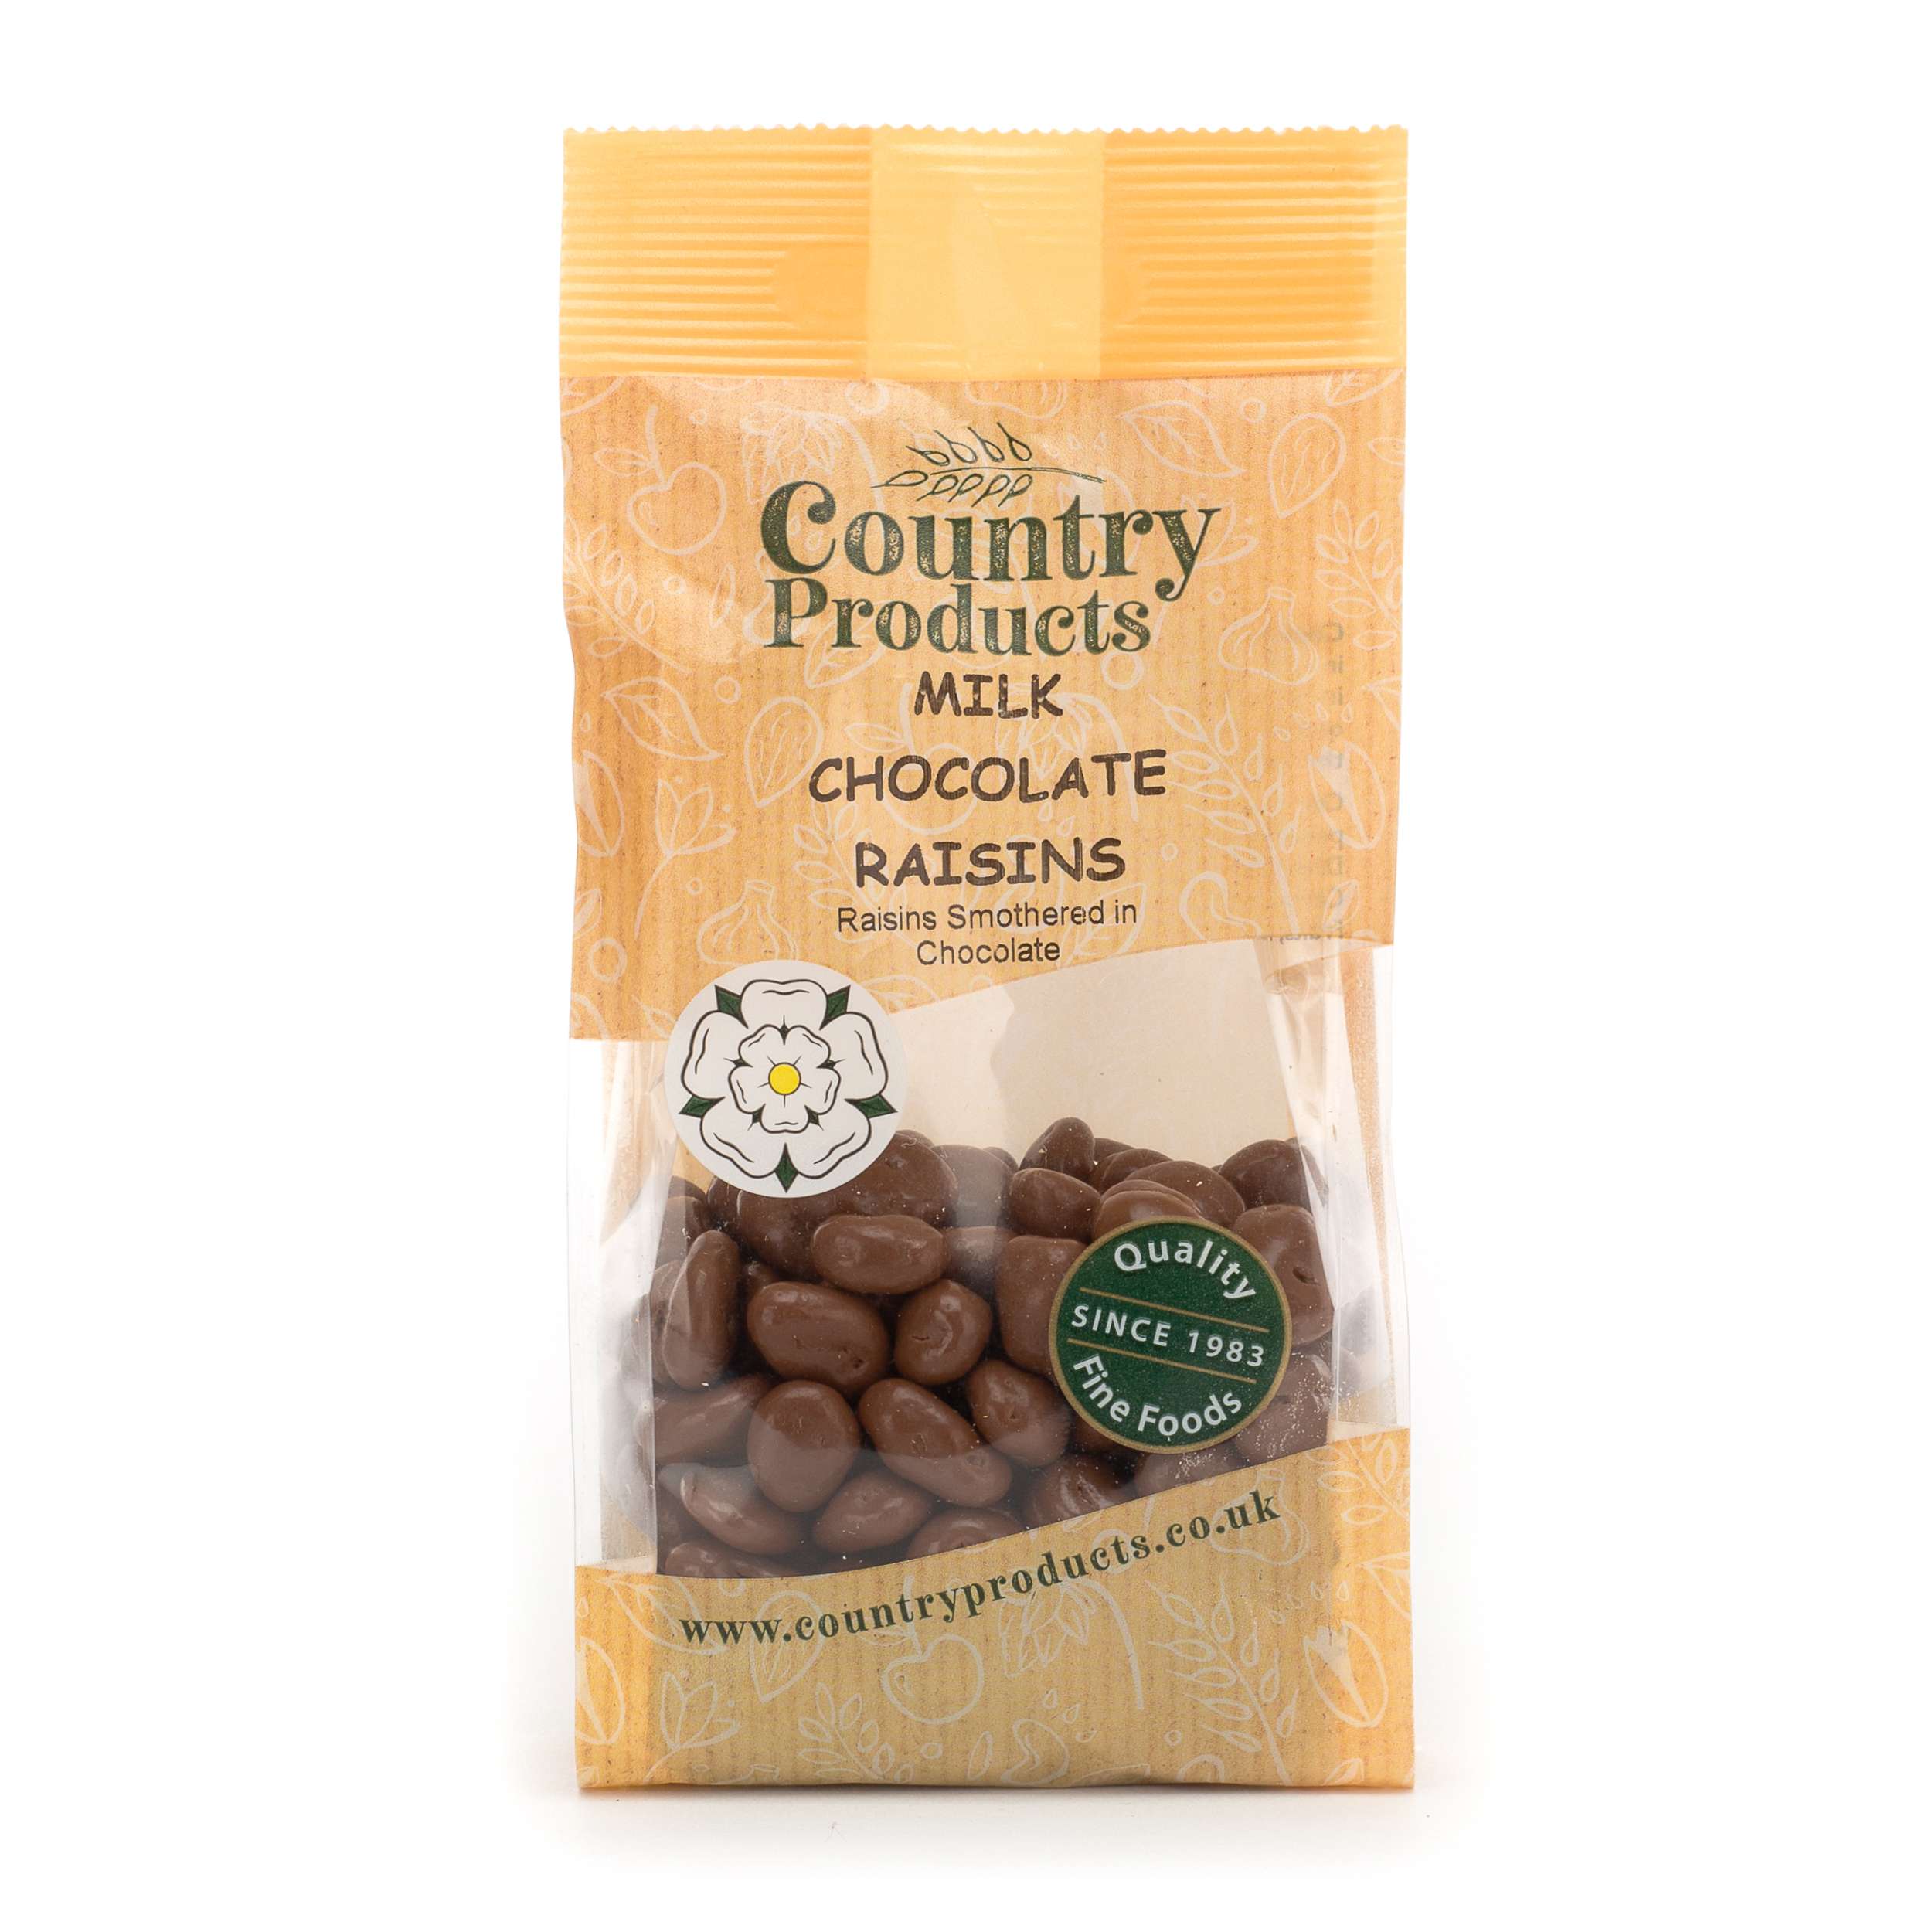 Country Products Milk Chocolate Raisins Other